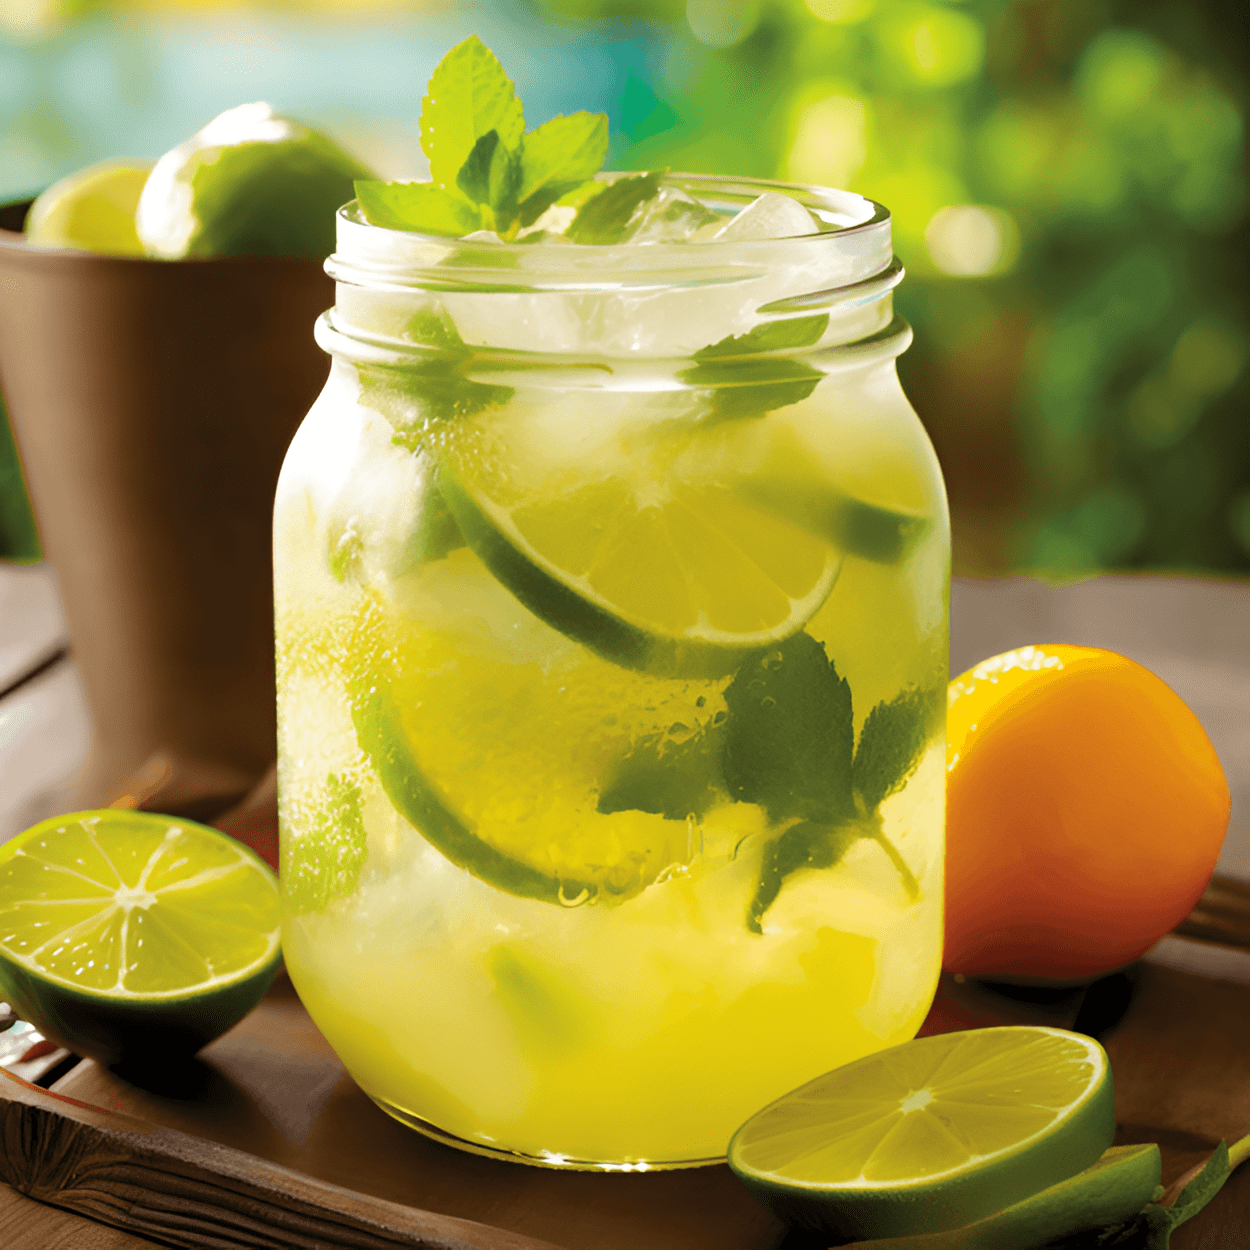 Yucca Cocktail Recipe - The Yucca cocktail is a refreshing, citrusy, and potent drink. It has a strong vodka base, balanced by the tartness of fresh lemons and limes, and sweetened with a touch of sugar. The taste is bold, tangy, and slightly sweet.